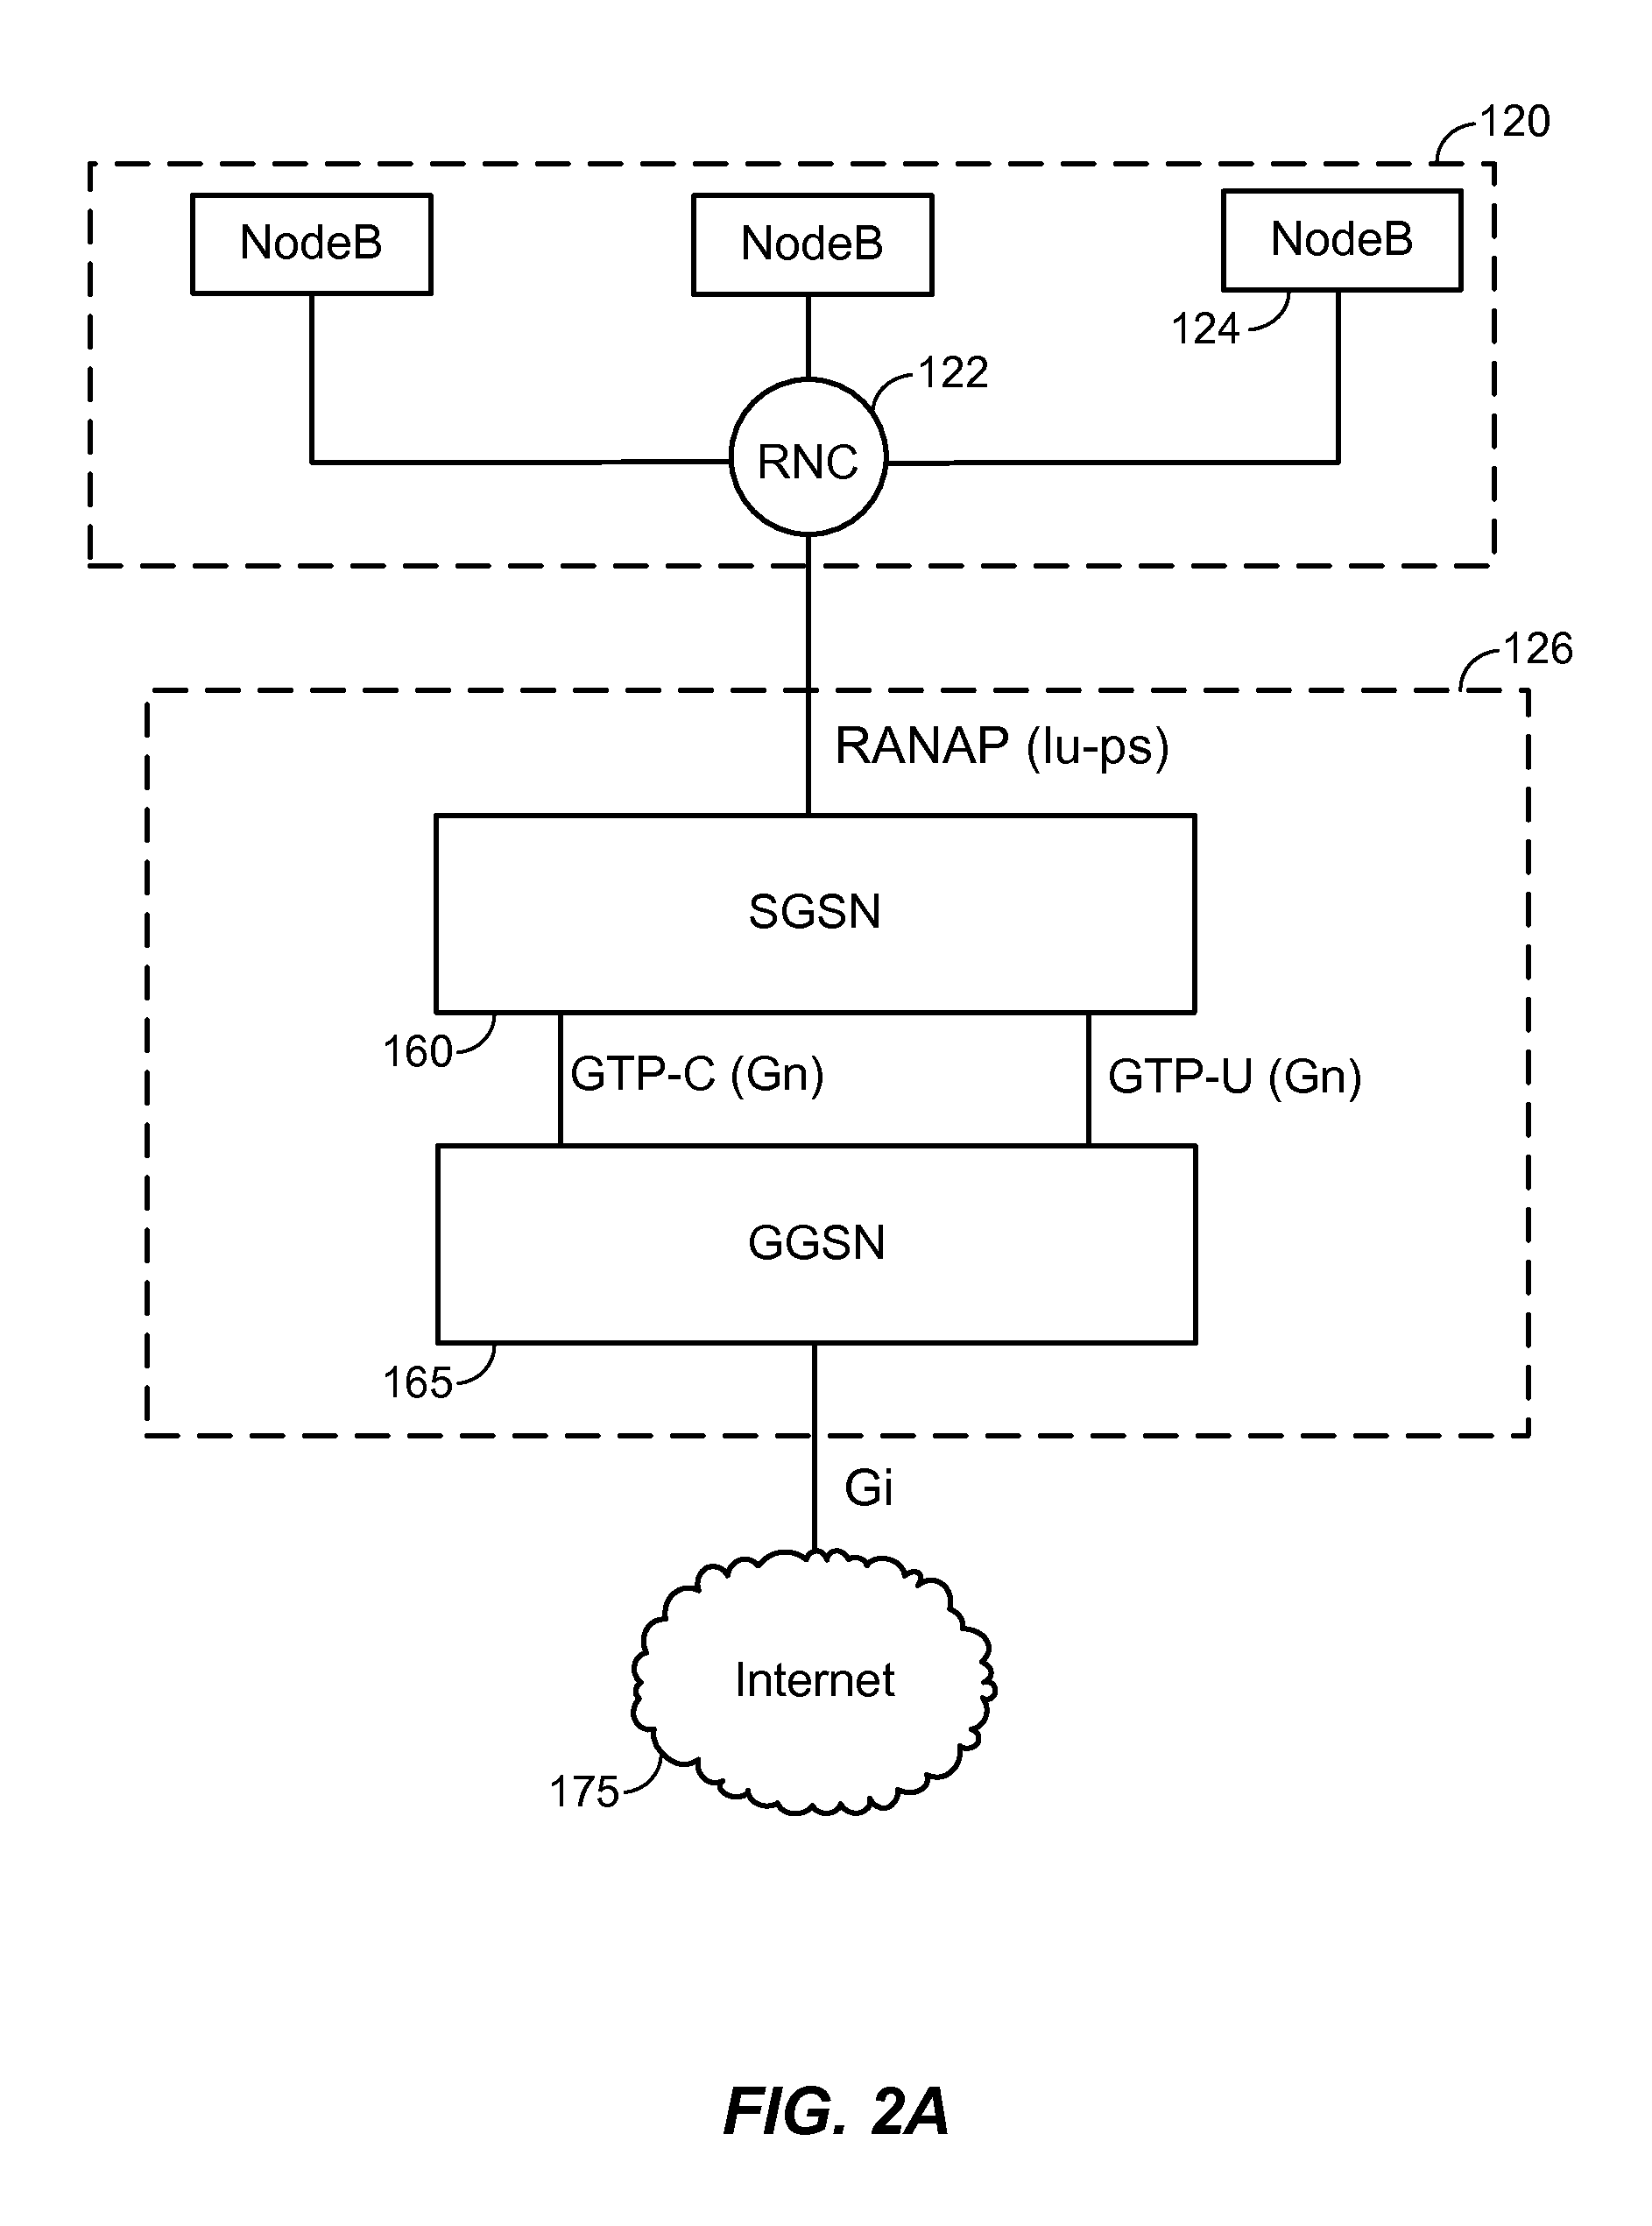 Facilitating distributed power production units in a power group to store power for power conditioning during an anticipated temporary power production disruption